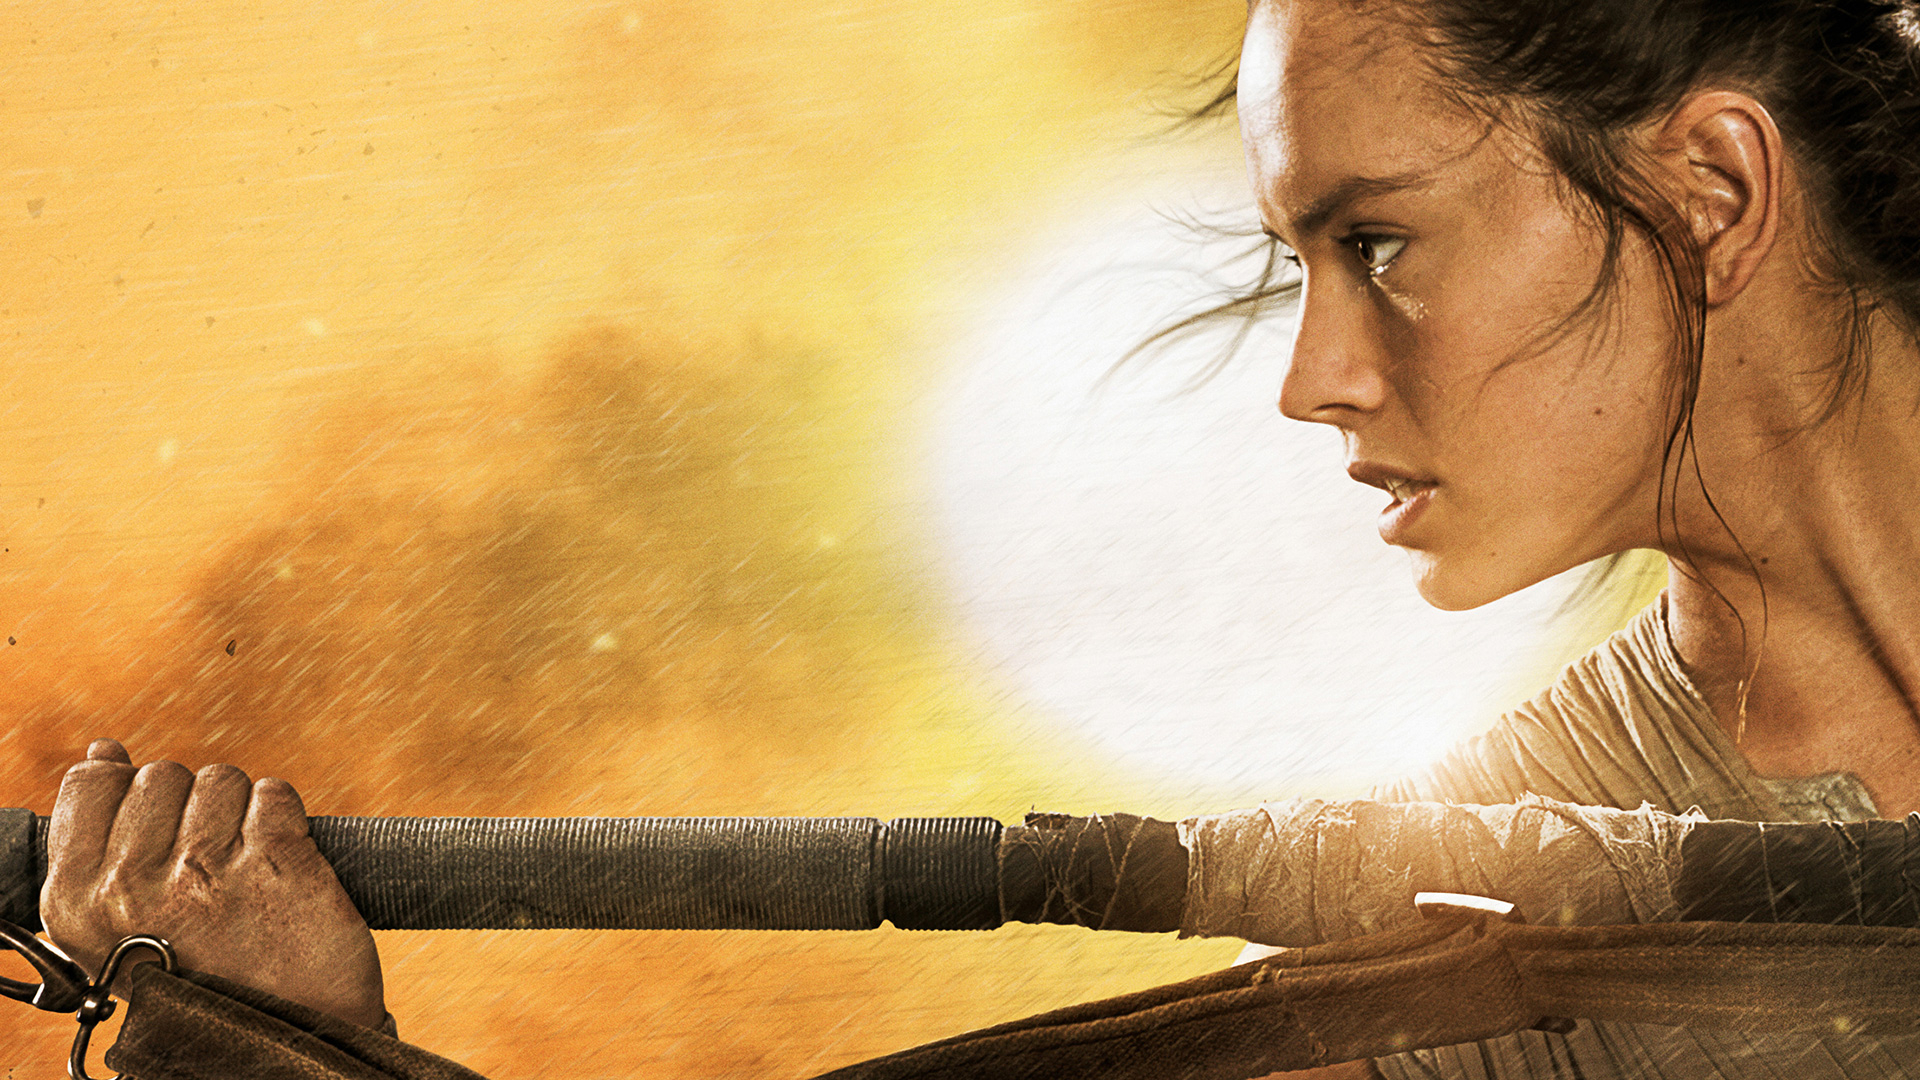 1920x1080 200+ Rey (Star Wars) HD Wallpapers and Backgrounds